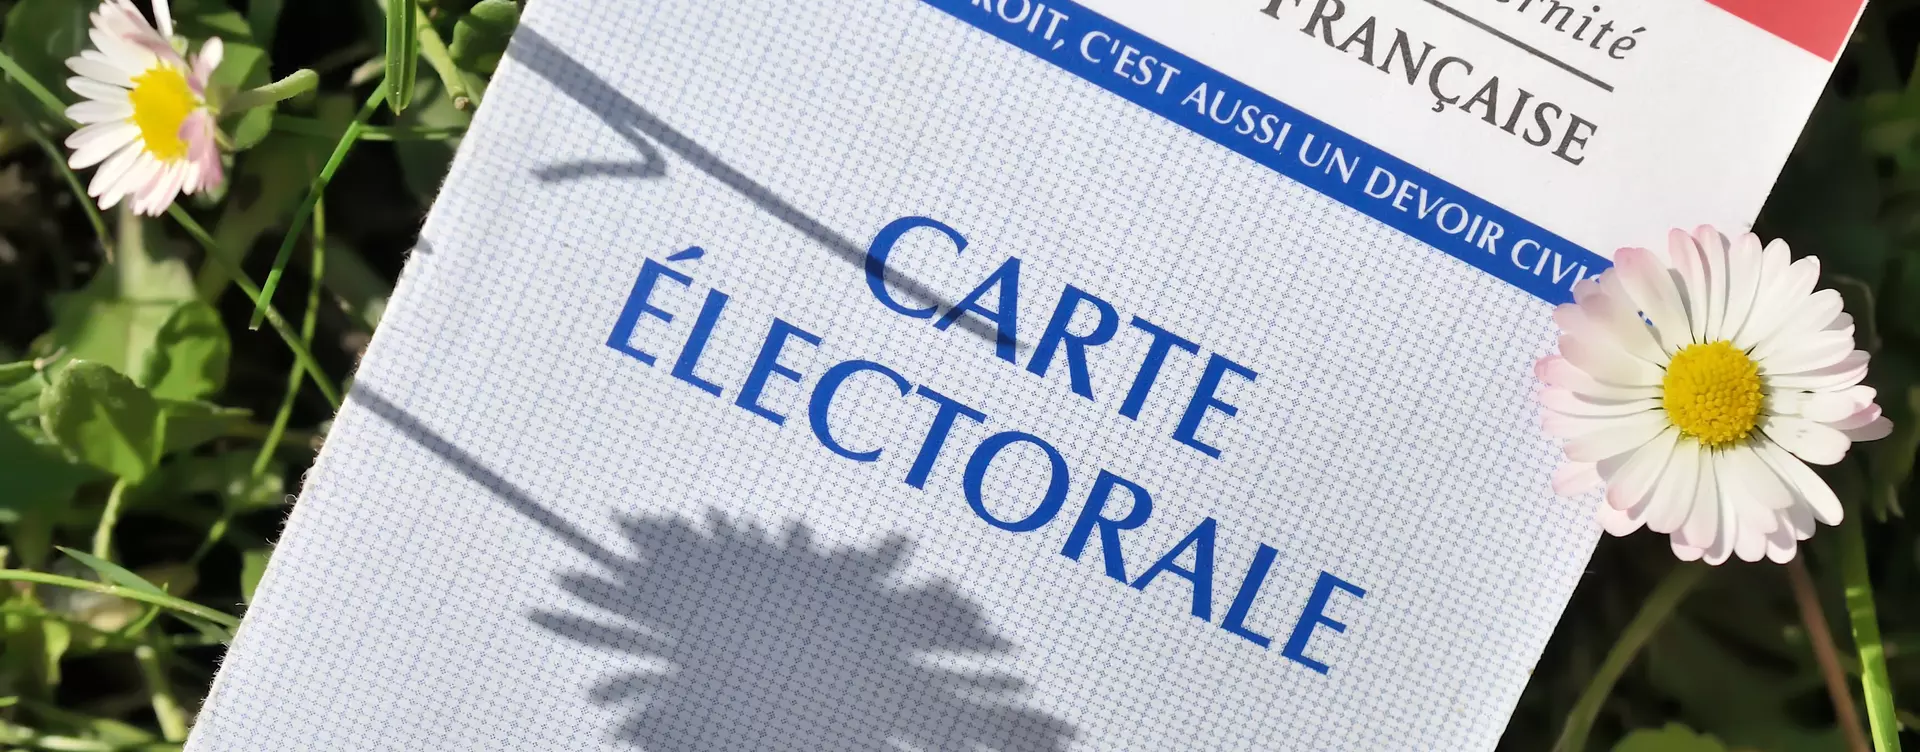 Elections à Chevilly